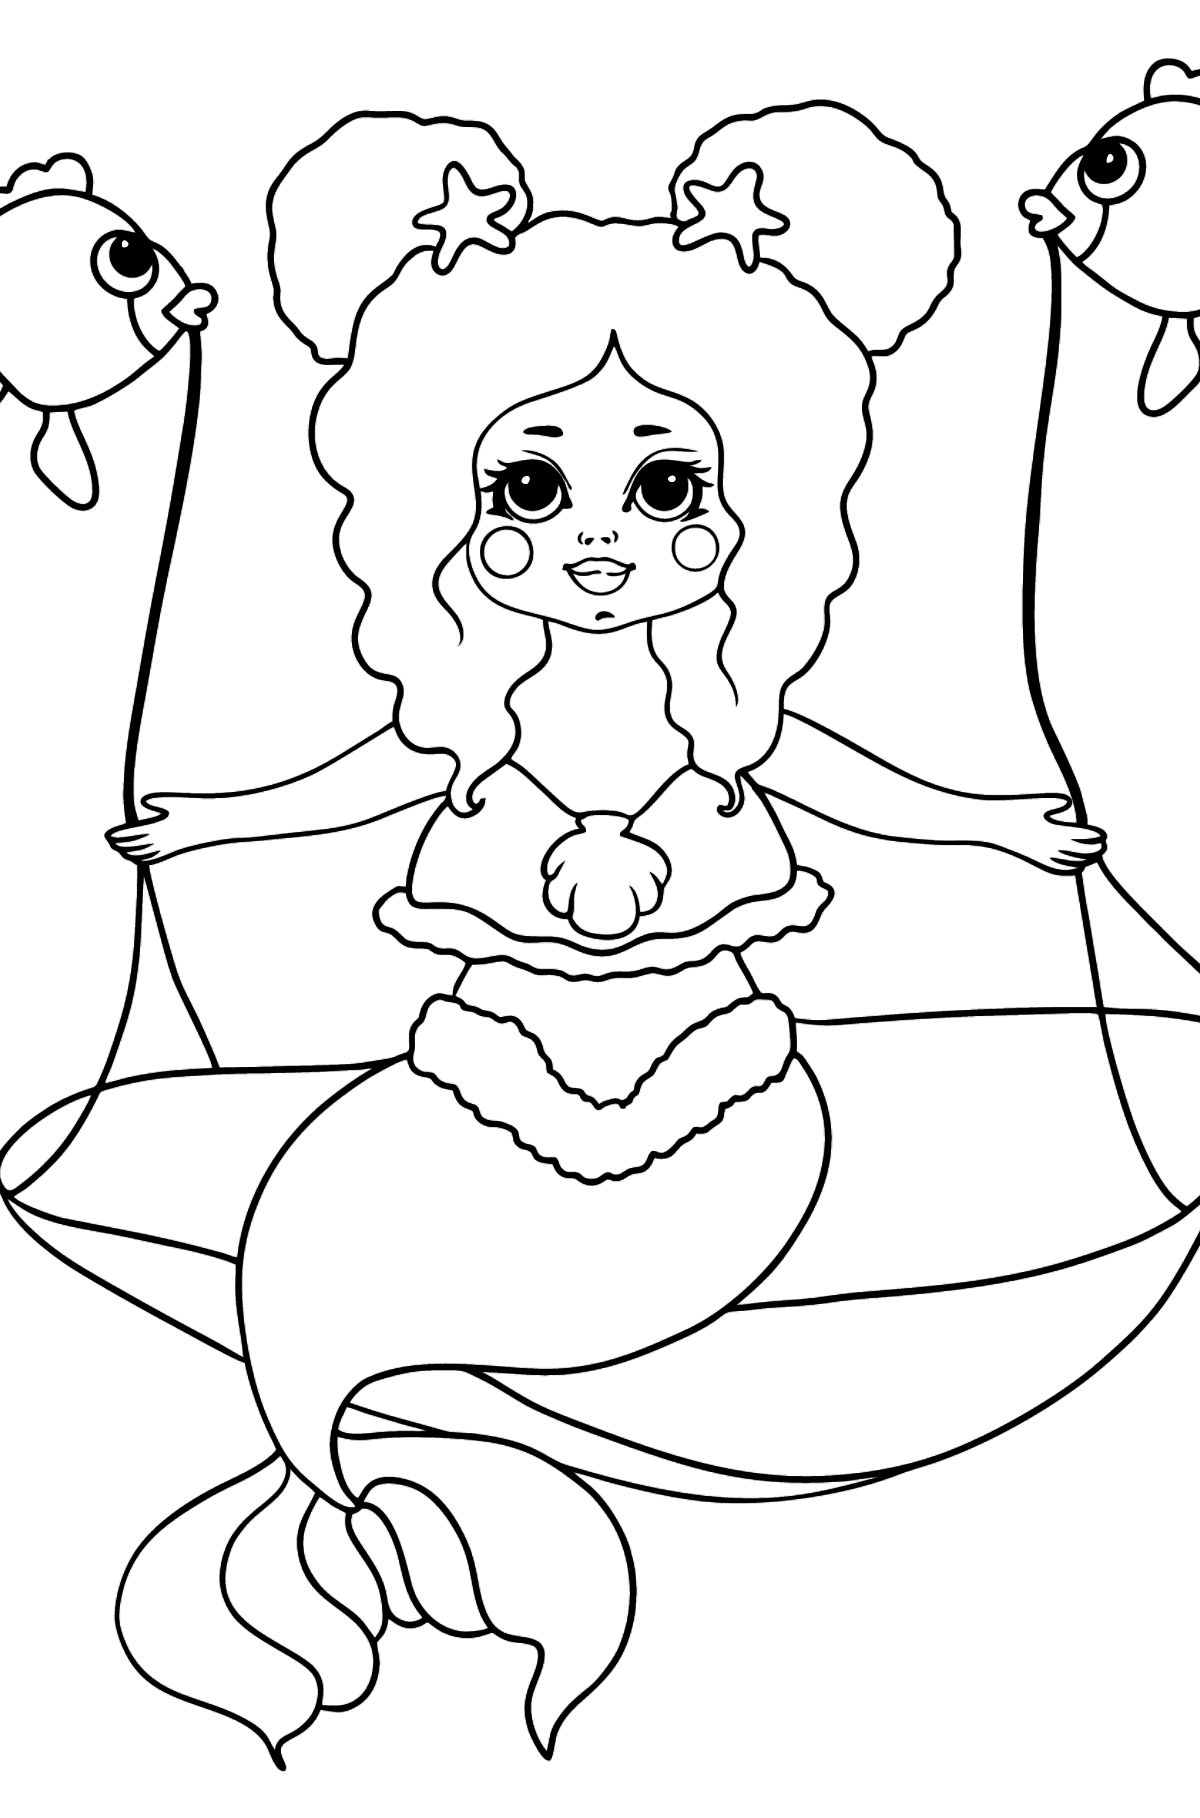 Mermaid and Two Fish coloring page - Coloring Pages for Kids